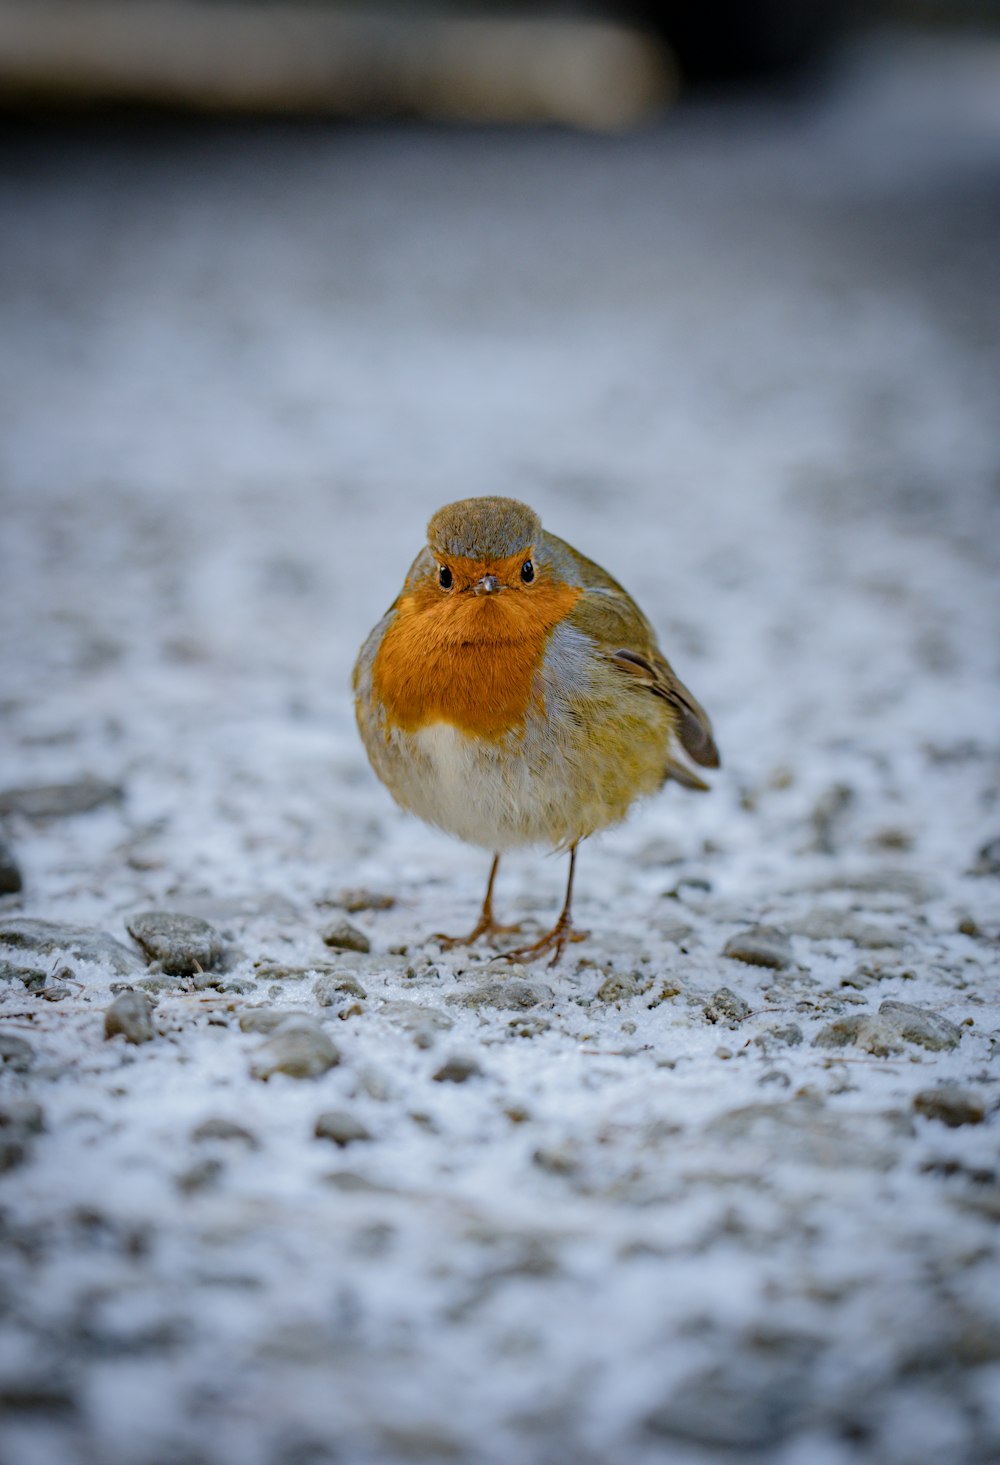 a small bird standing on the ground in the snow